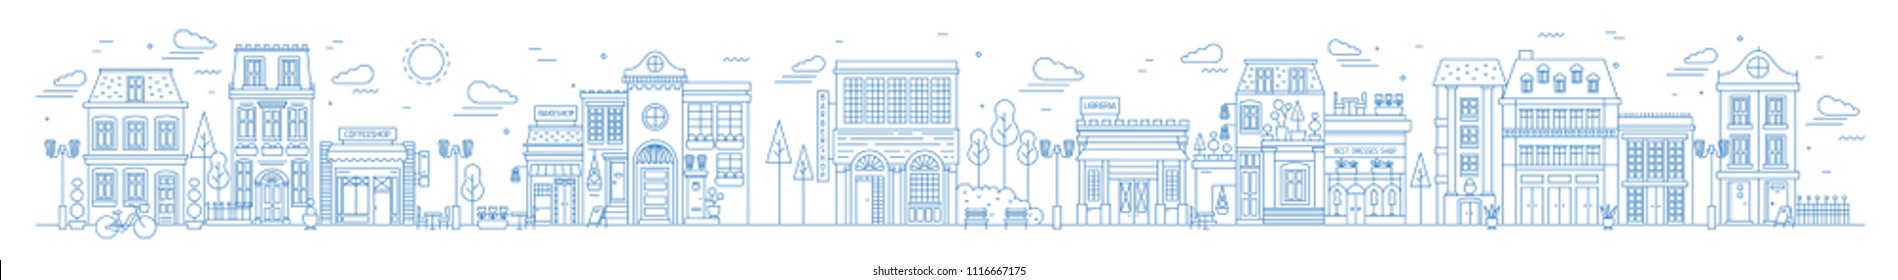 Monochrome horizontal urban landscape with city or town street or district. Cityscape with living houses and shops drawn with contour lines on white background. Vector illustration in lineart style.